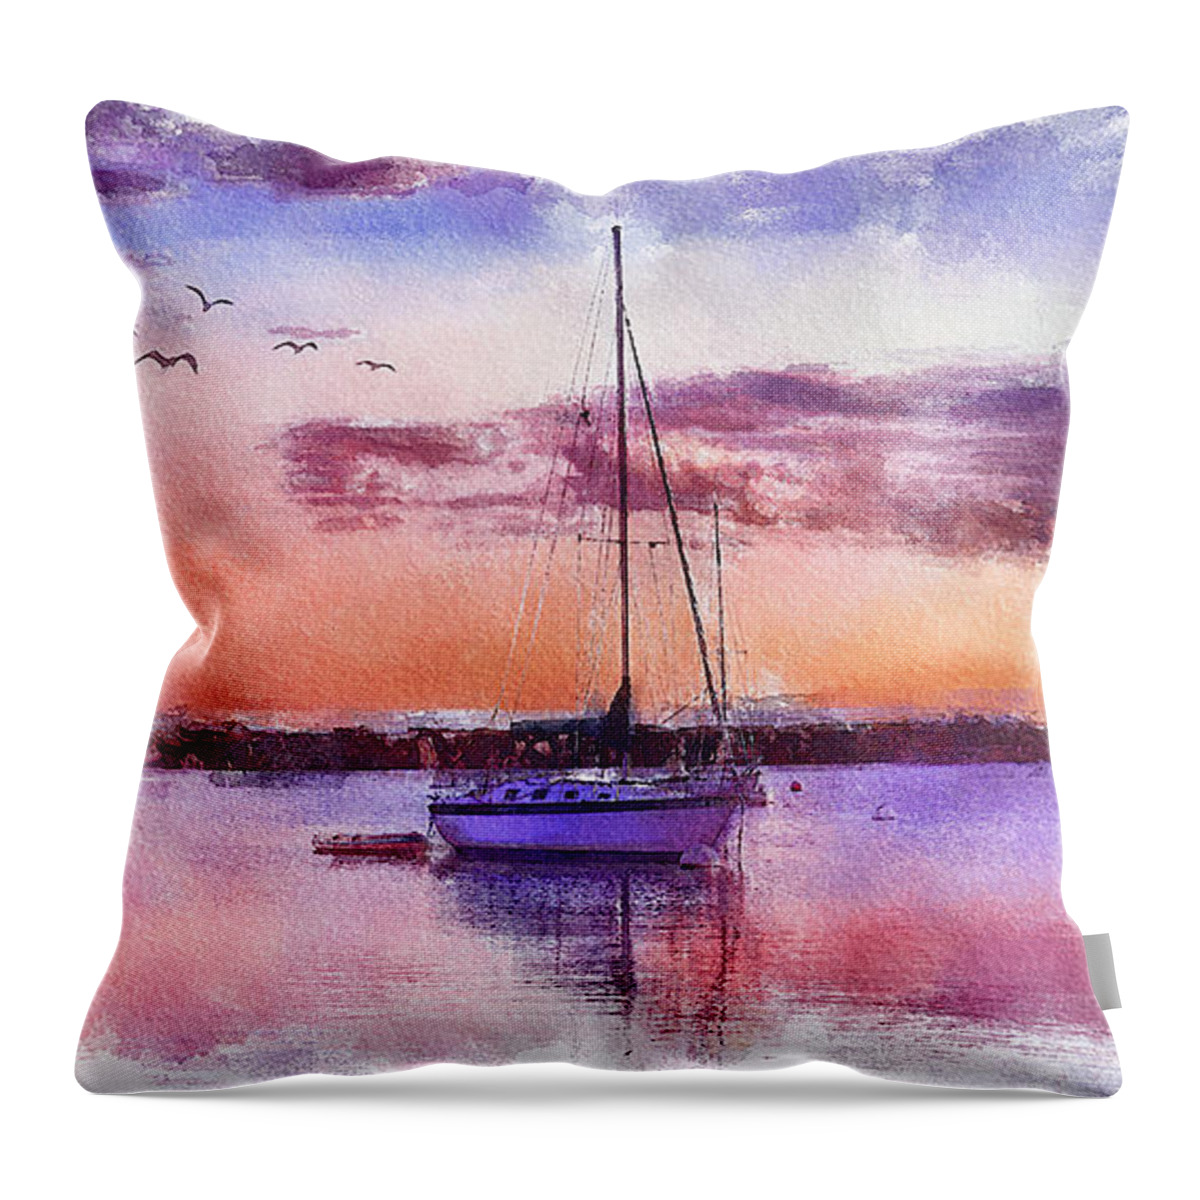 Sunset Throw Pillow featuring the digital art Sunset on the Water by Brenda Wilcox aka Wildeyed n Wicked